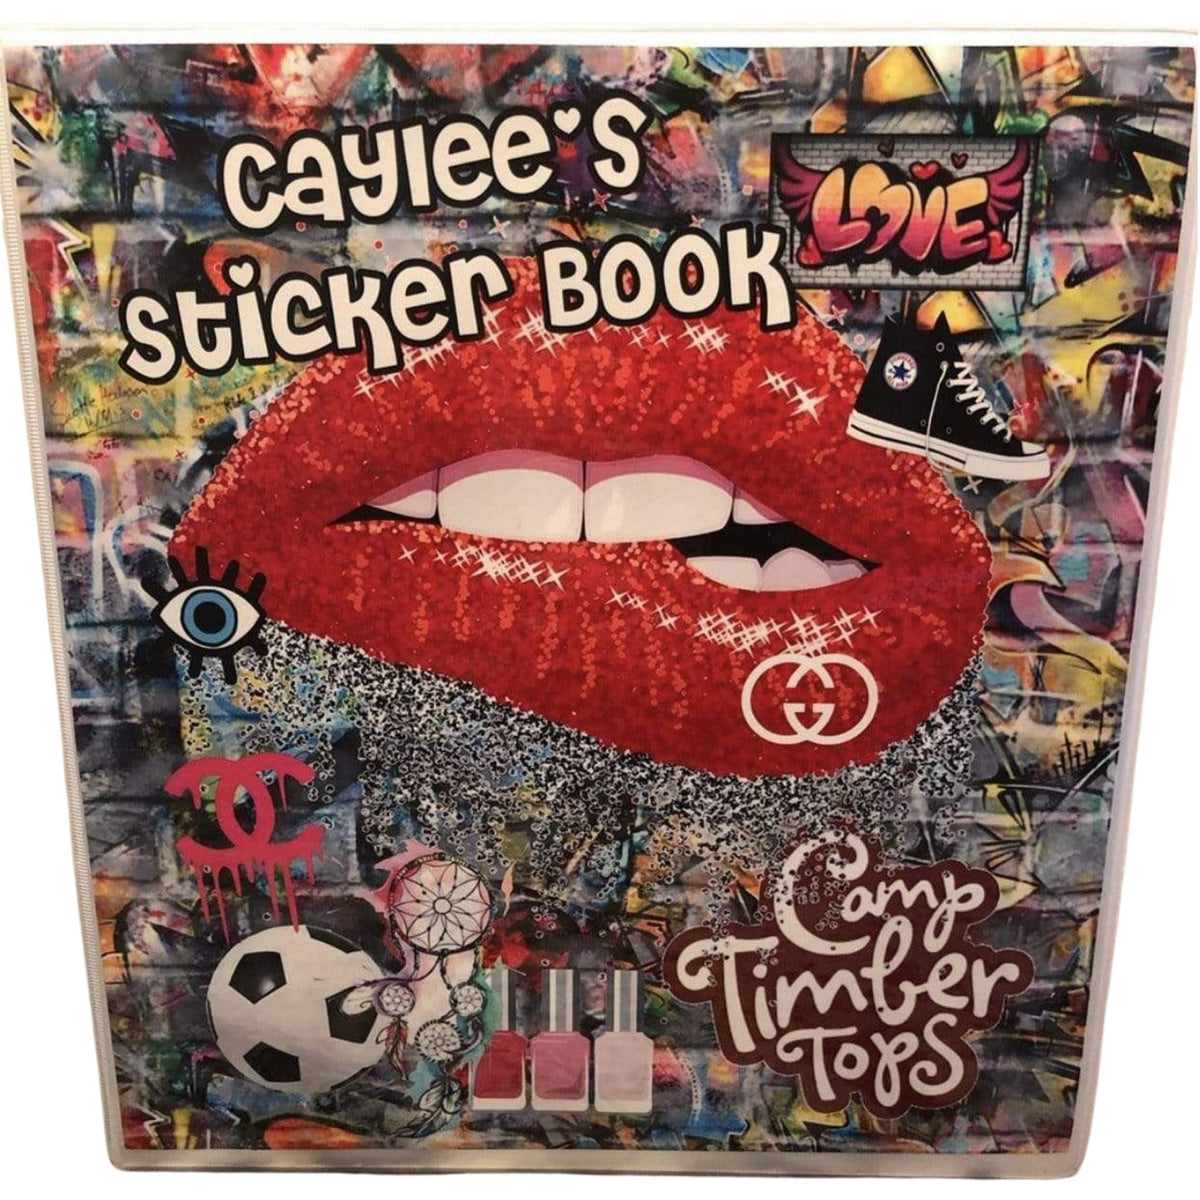 Favorite Things Sticker Book, Photo Album or Trading Card Book - a Spirit Animal - photo album $30-$45 Gift gifts